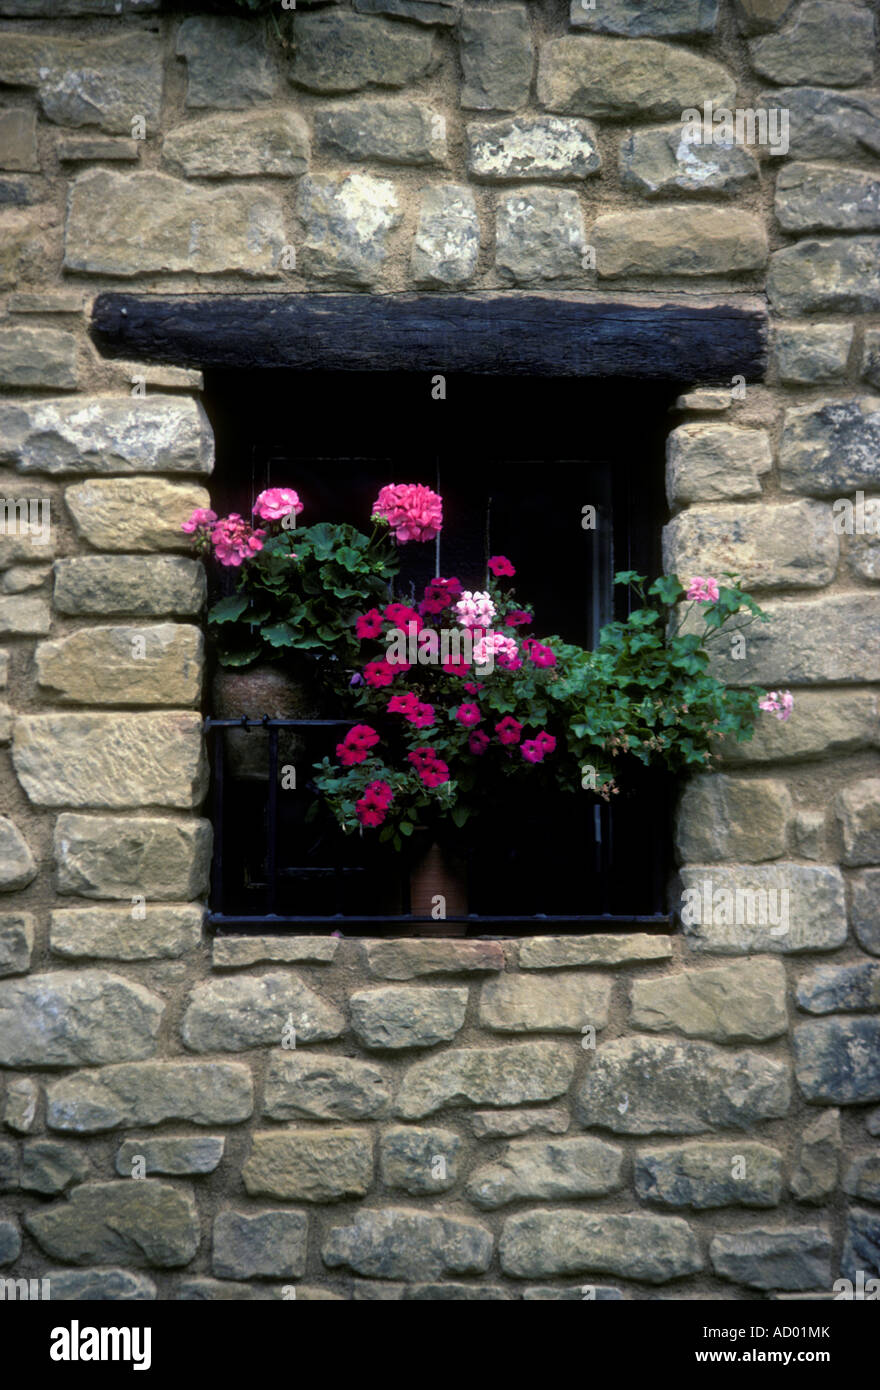 flowers in flower pot, window sill, Spanish Basque country, Ujue, Spain, Europe Stock Photo